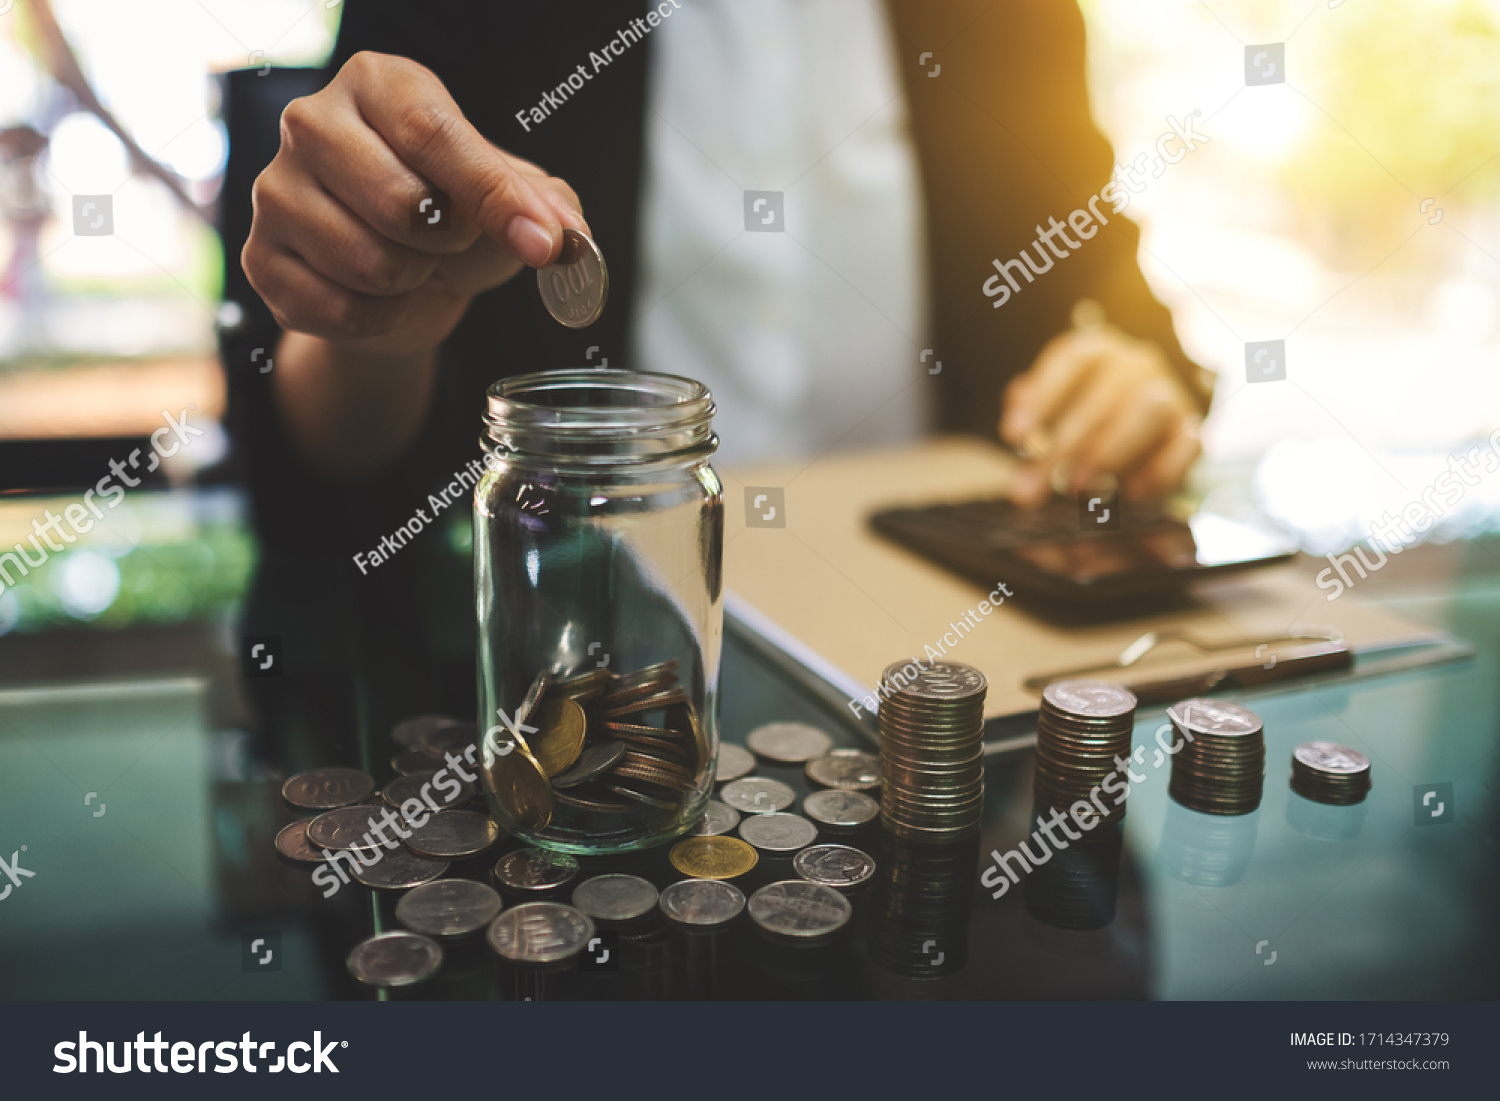 Closeup image of a businesswoman calculating, stacking and putting coins in a glass jar for saving money and financial concept #1714347379